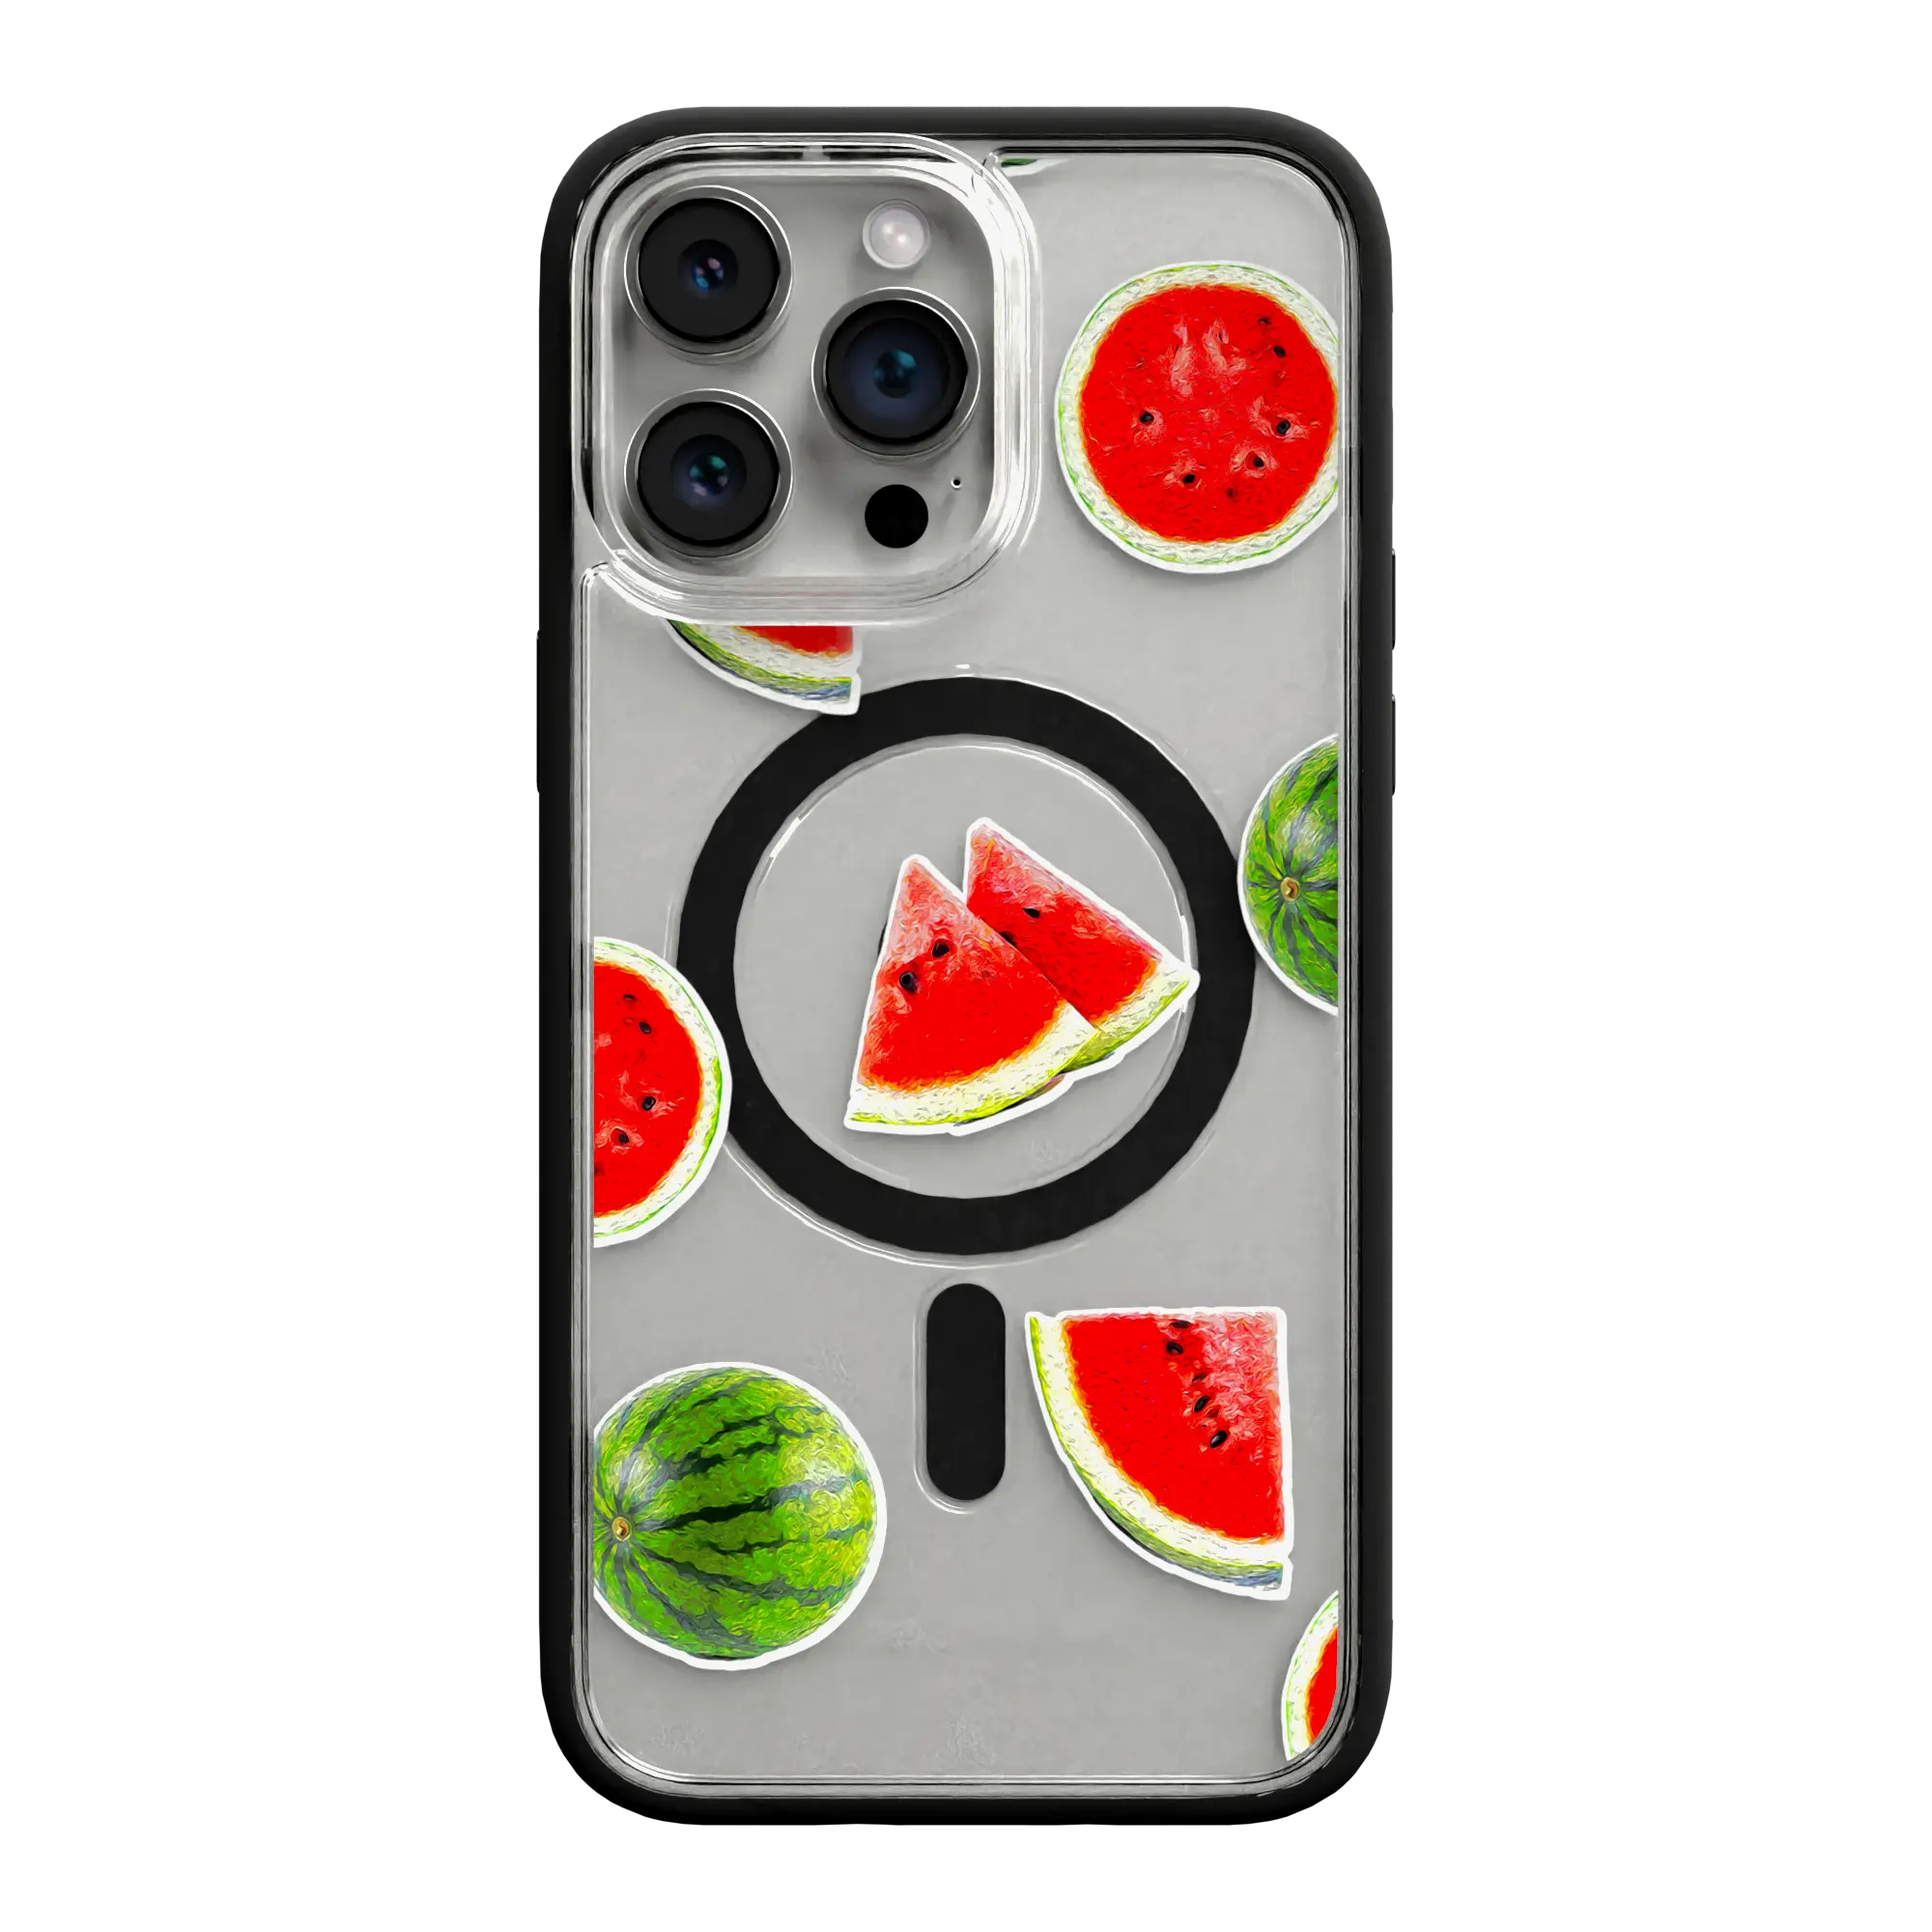 Apple-iPhone-12-Pro-Max-Crystal-Clear Watermelon Burst | Protective MagSafe Case | Fruits Collection for Apple iPhone 12 Series cellhelmet cellhelmet